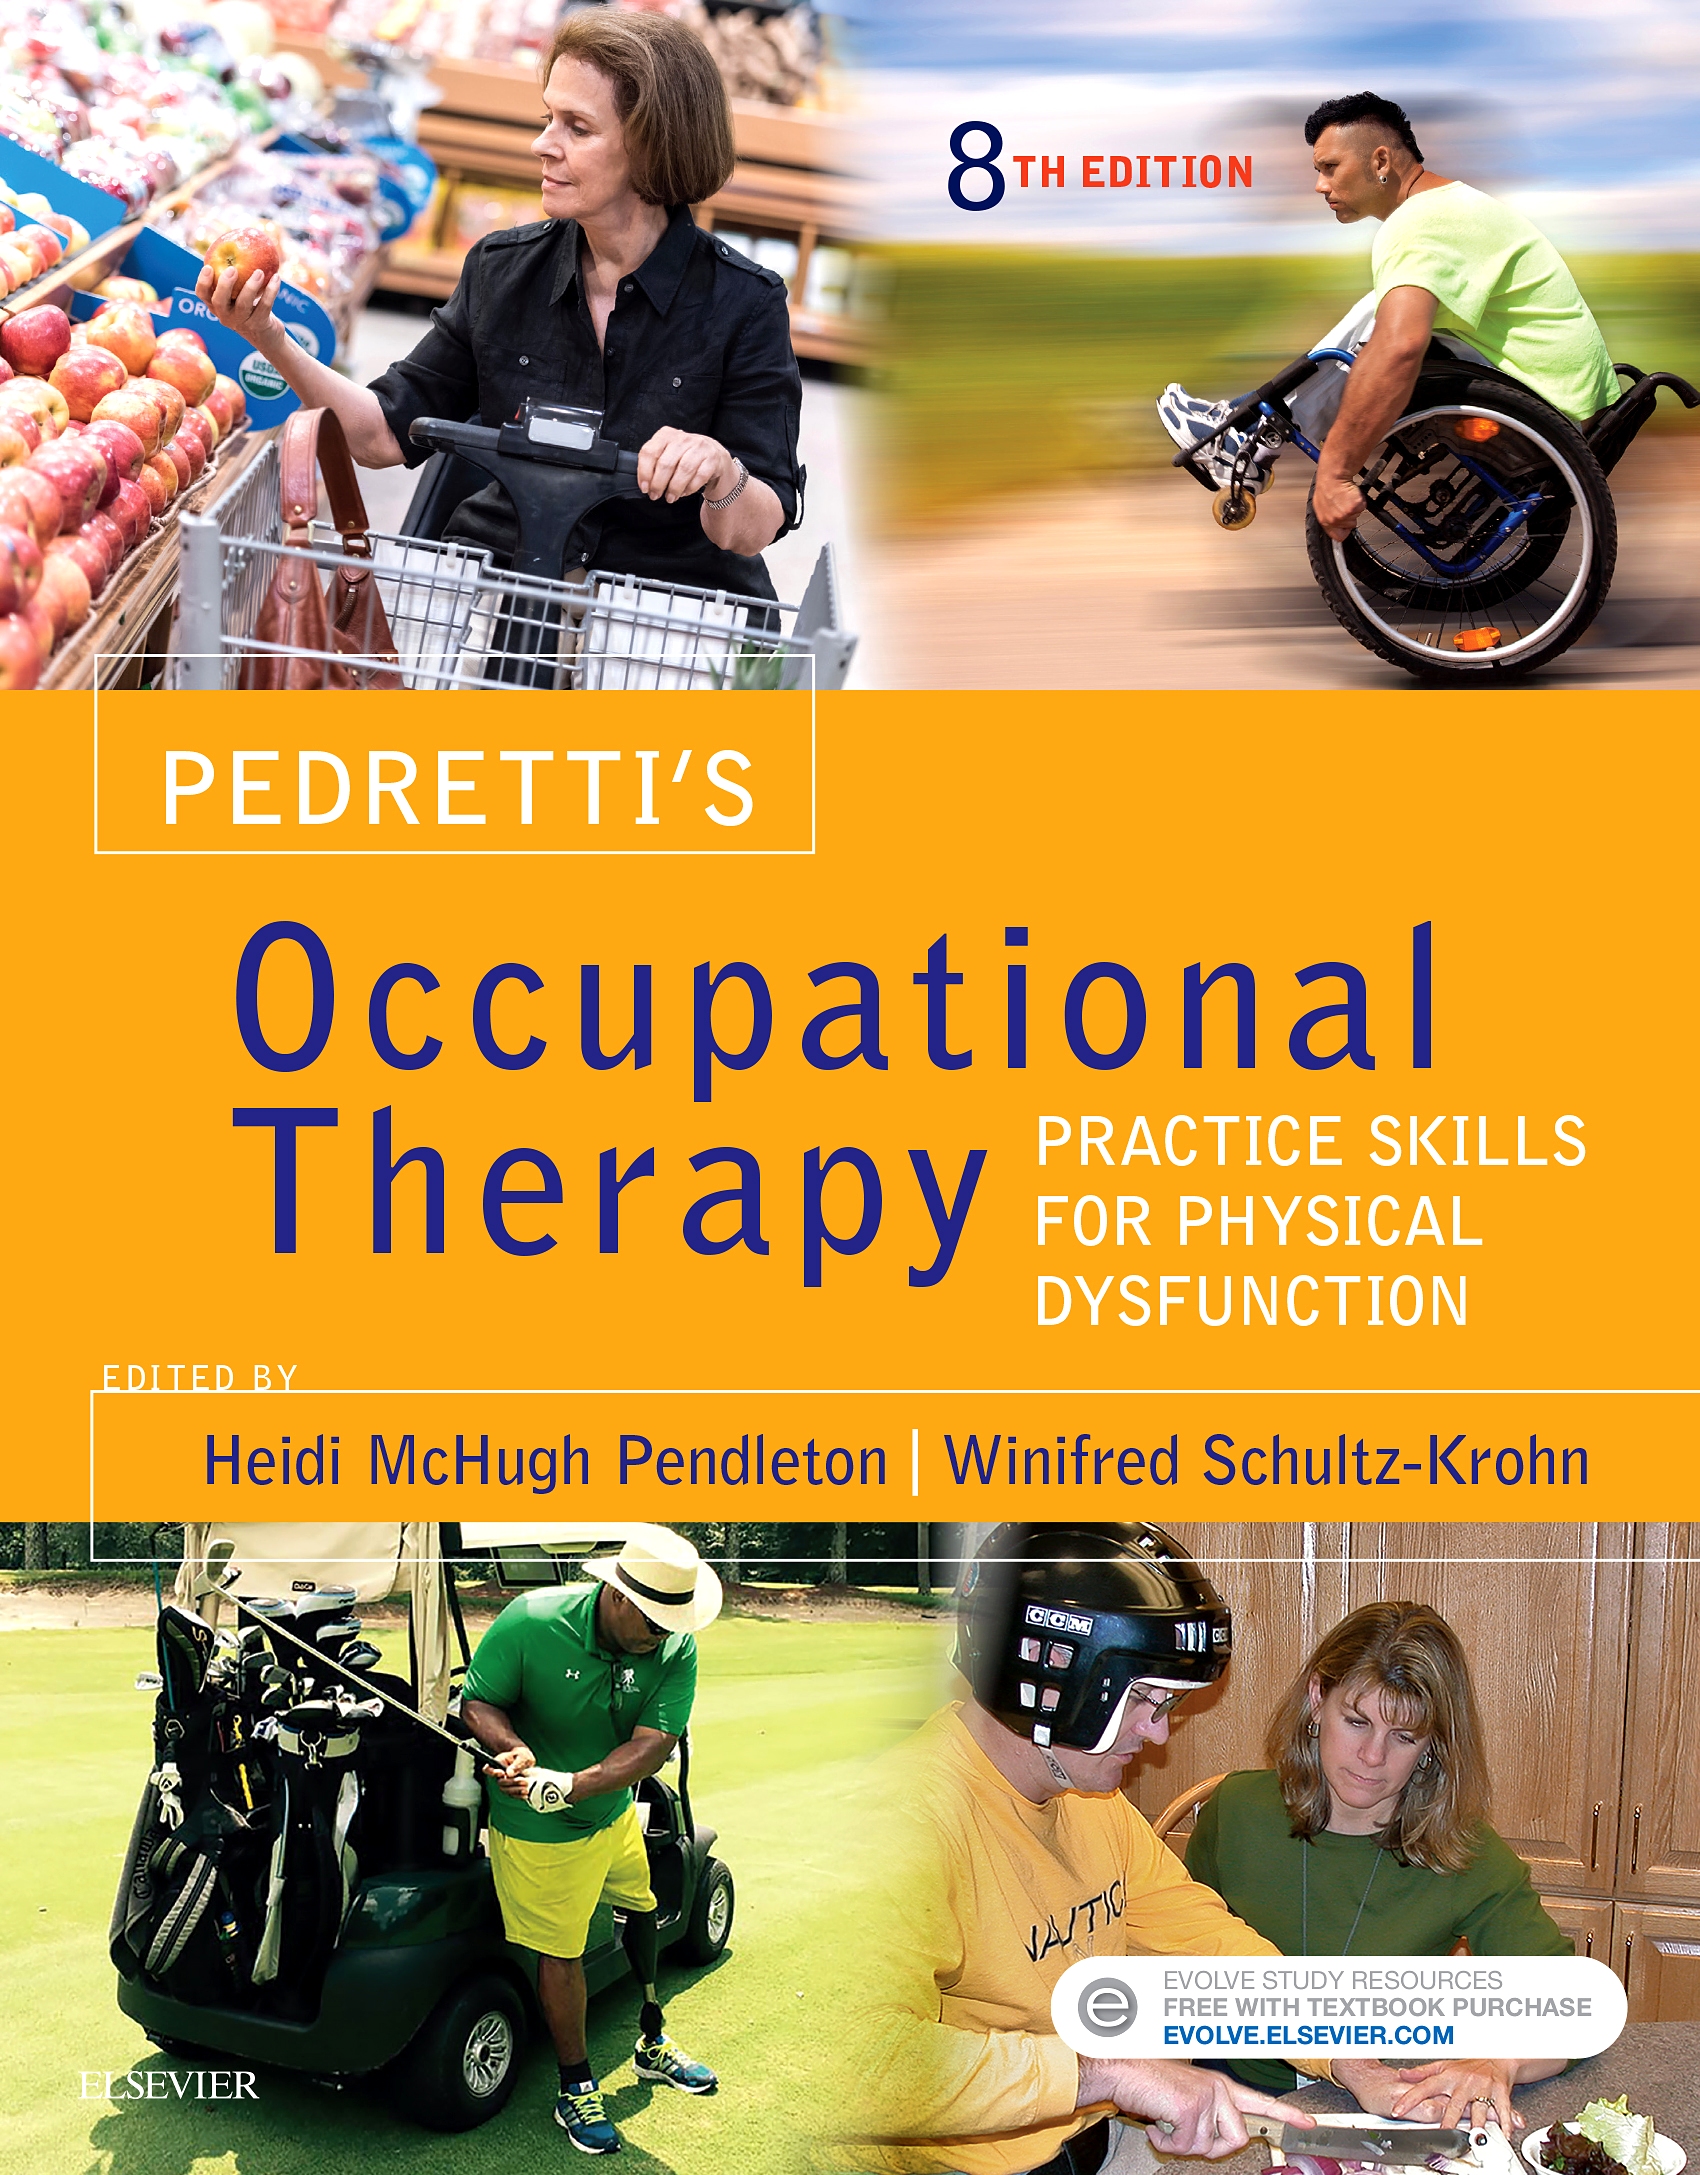 Evolve Resource for Pedretti's Occupational Therapy, 8th Edition